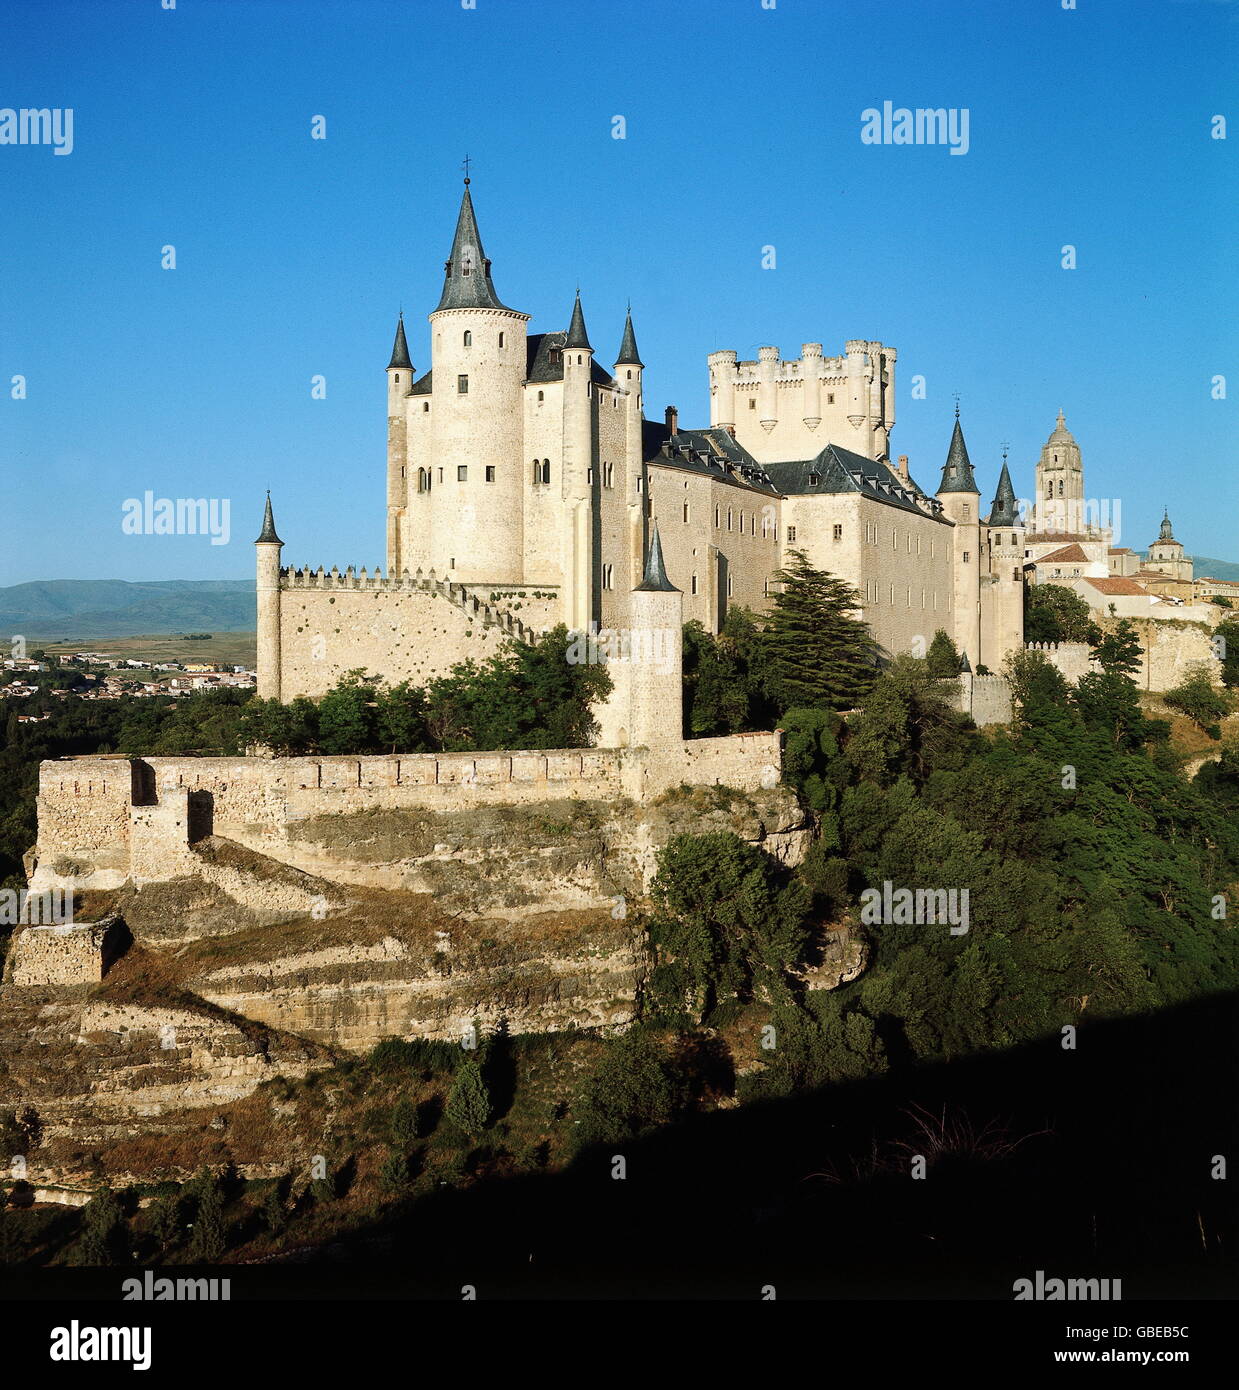 geography / travel,Spain,Segovia,Alcazar,built by the Moorish in the early 12th century,last modification in the late 16th century,view from Southwest,in front: treasure tower,middle: tower of King Johann II,Old Castile,Castile,Reconquista,Middle Ages,royal palace,kingly residence,royal residence,treasury,treasure house,treasuries,military academy,Gothic style,Gothic period,fortress,fortresses,merlon,merlons,historic,historical,Sierra Guadarrama,world cultural heritage,world heritage list,South Western Europe,Southern Europe,Wes,Additional-Rights-Clearences-Not Available Stock Photo